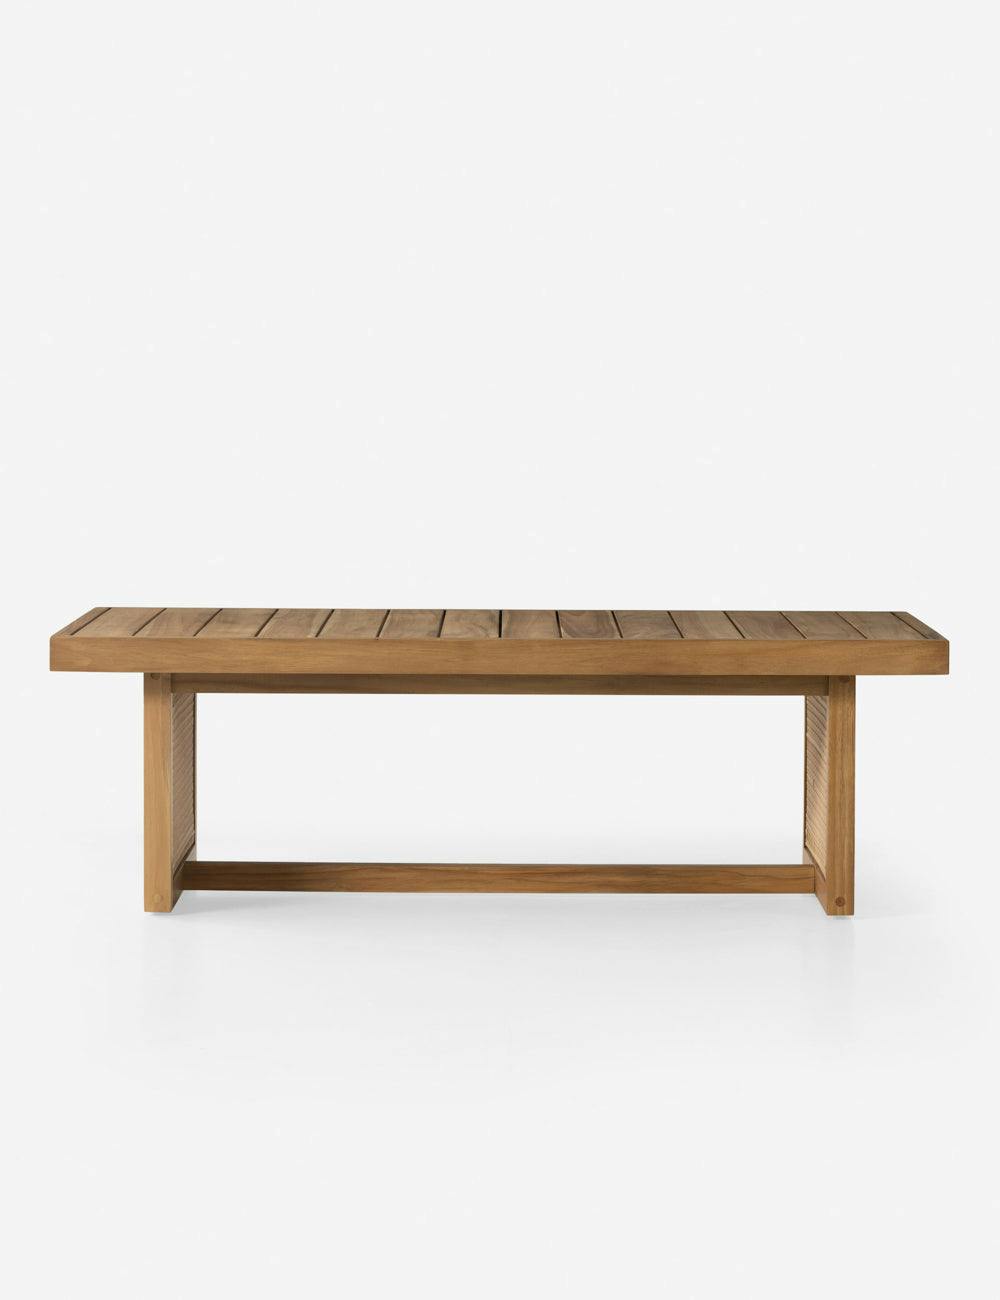 Anson Breezy Charm Natural Teak Slatted Coffee Table